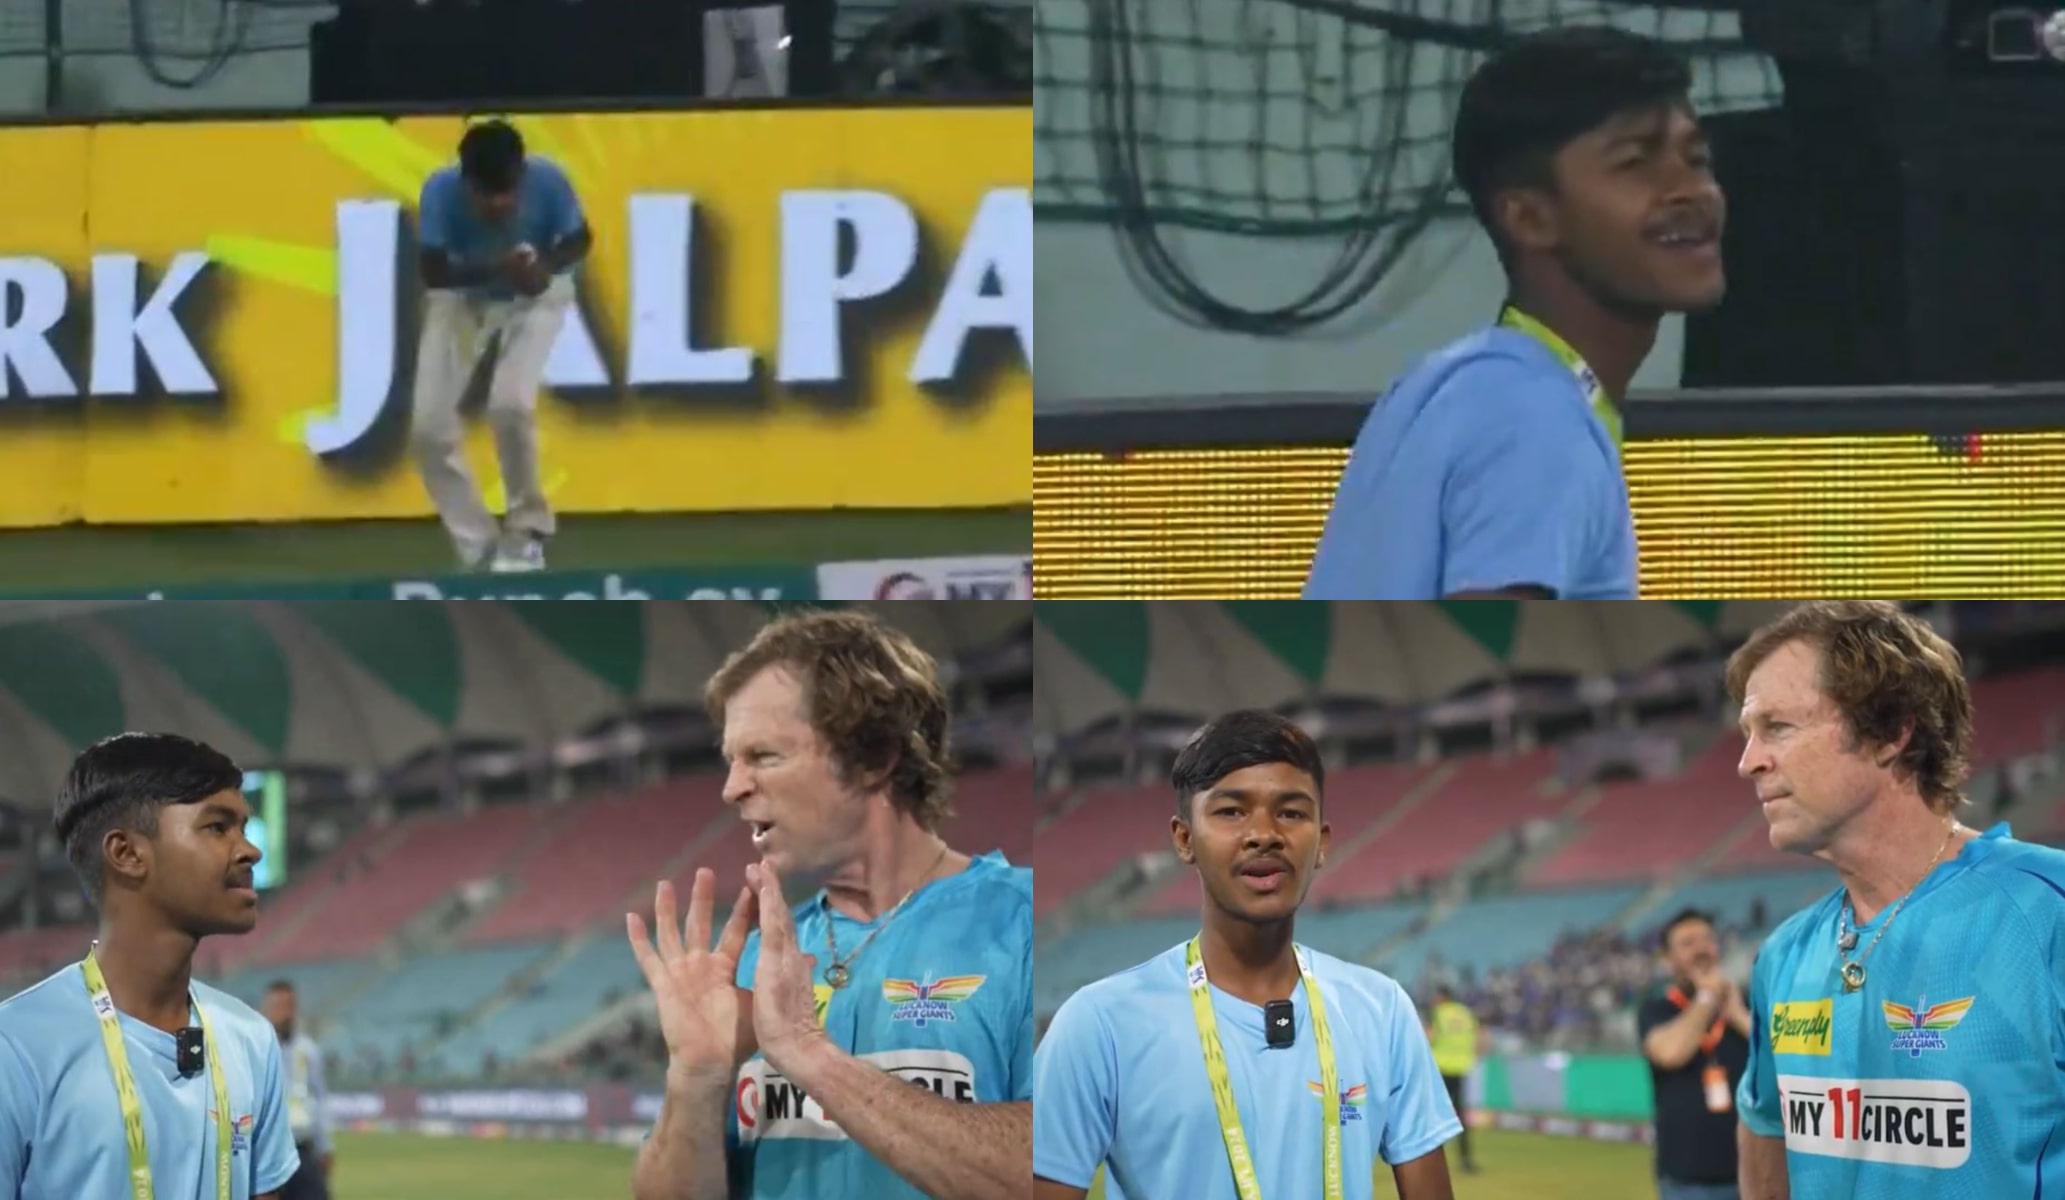 Atharwa had taken a good catch beyond boundary ropes on a six hit by Marcus Stoinis | IPL X